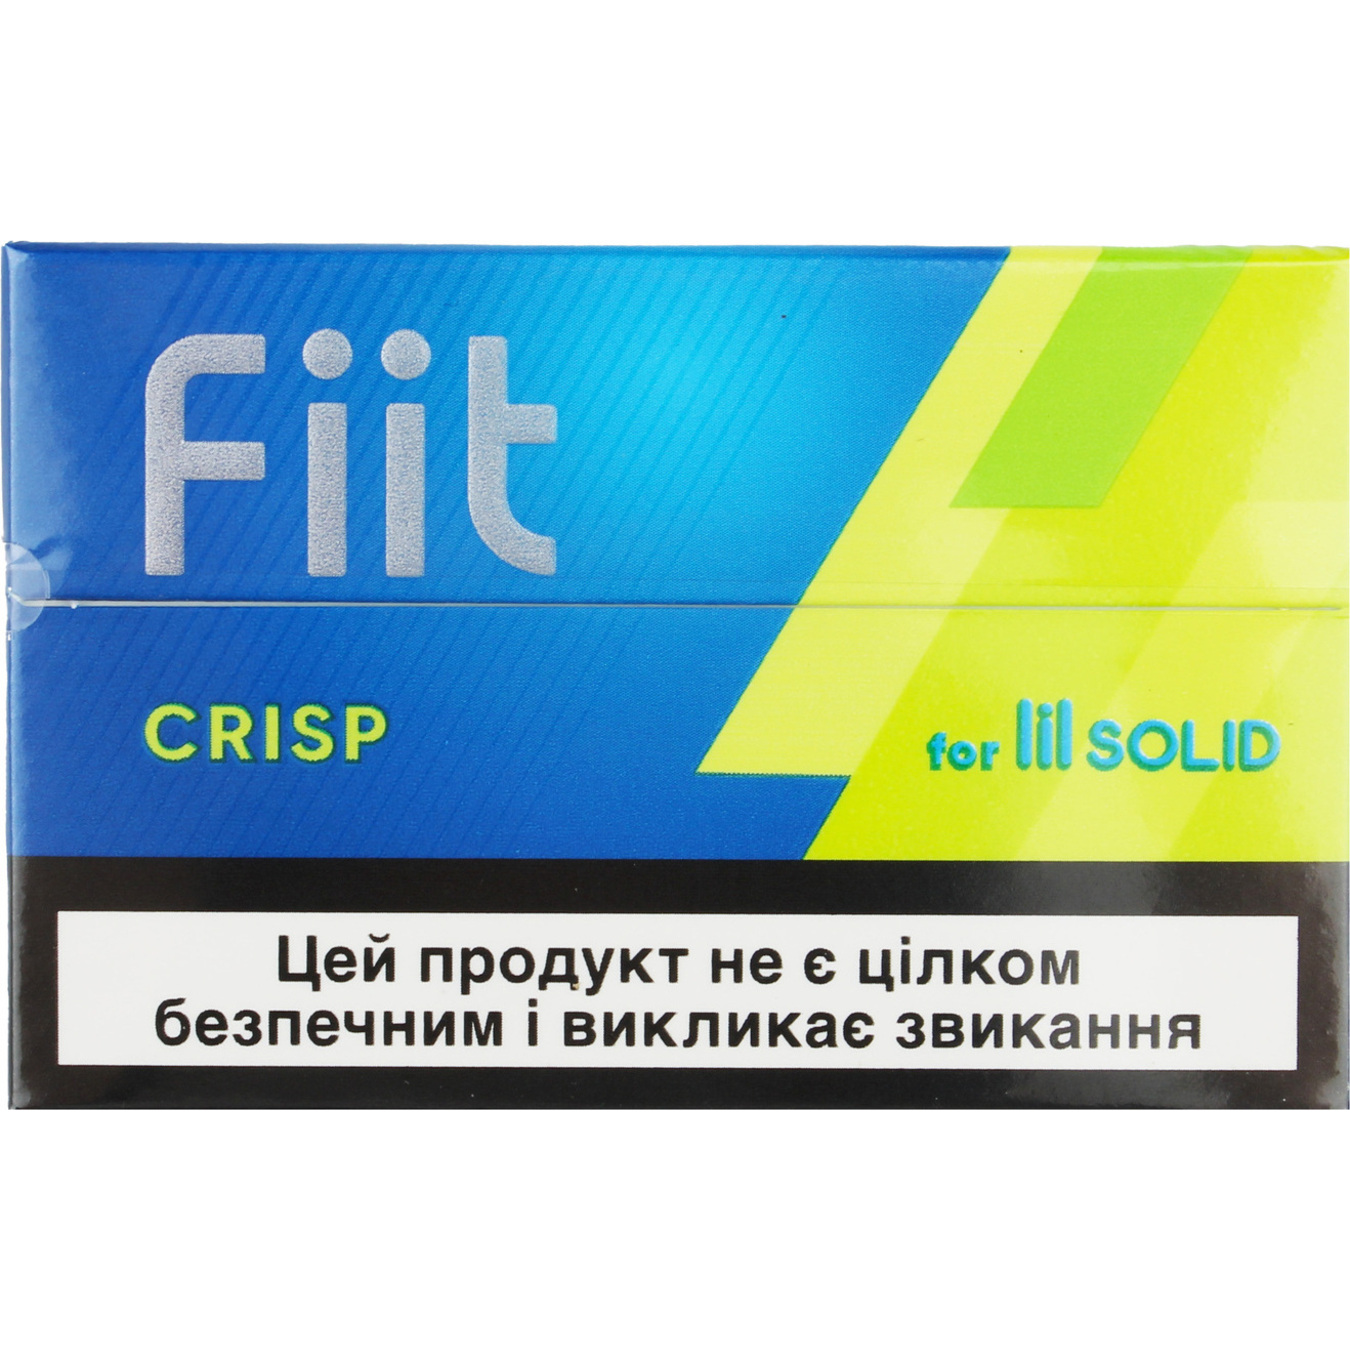 Fiit Crisp tobacco sticks 5.3g 20pcs (the price is without excise tax)